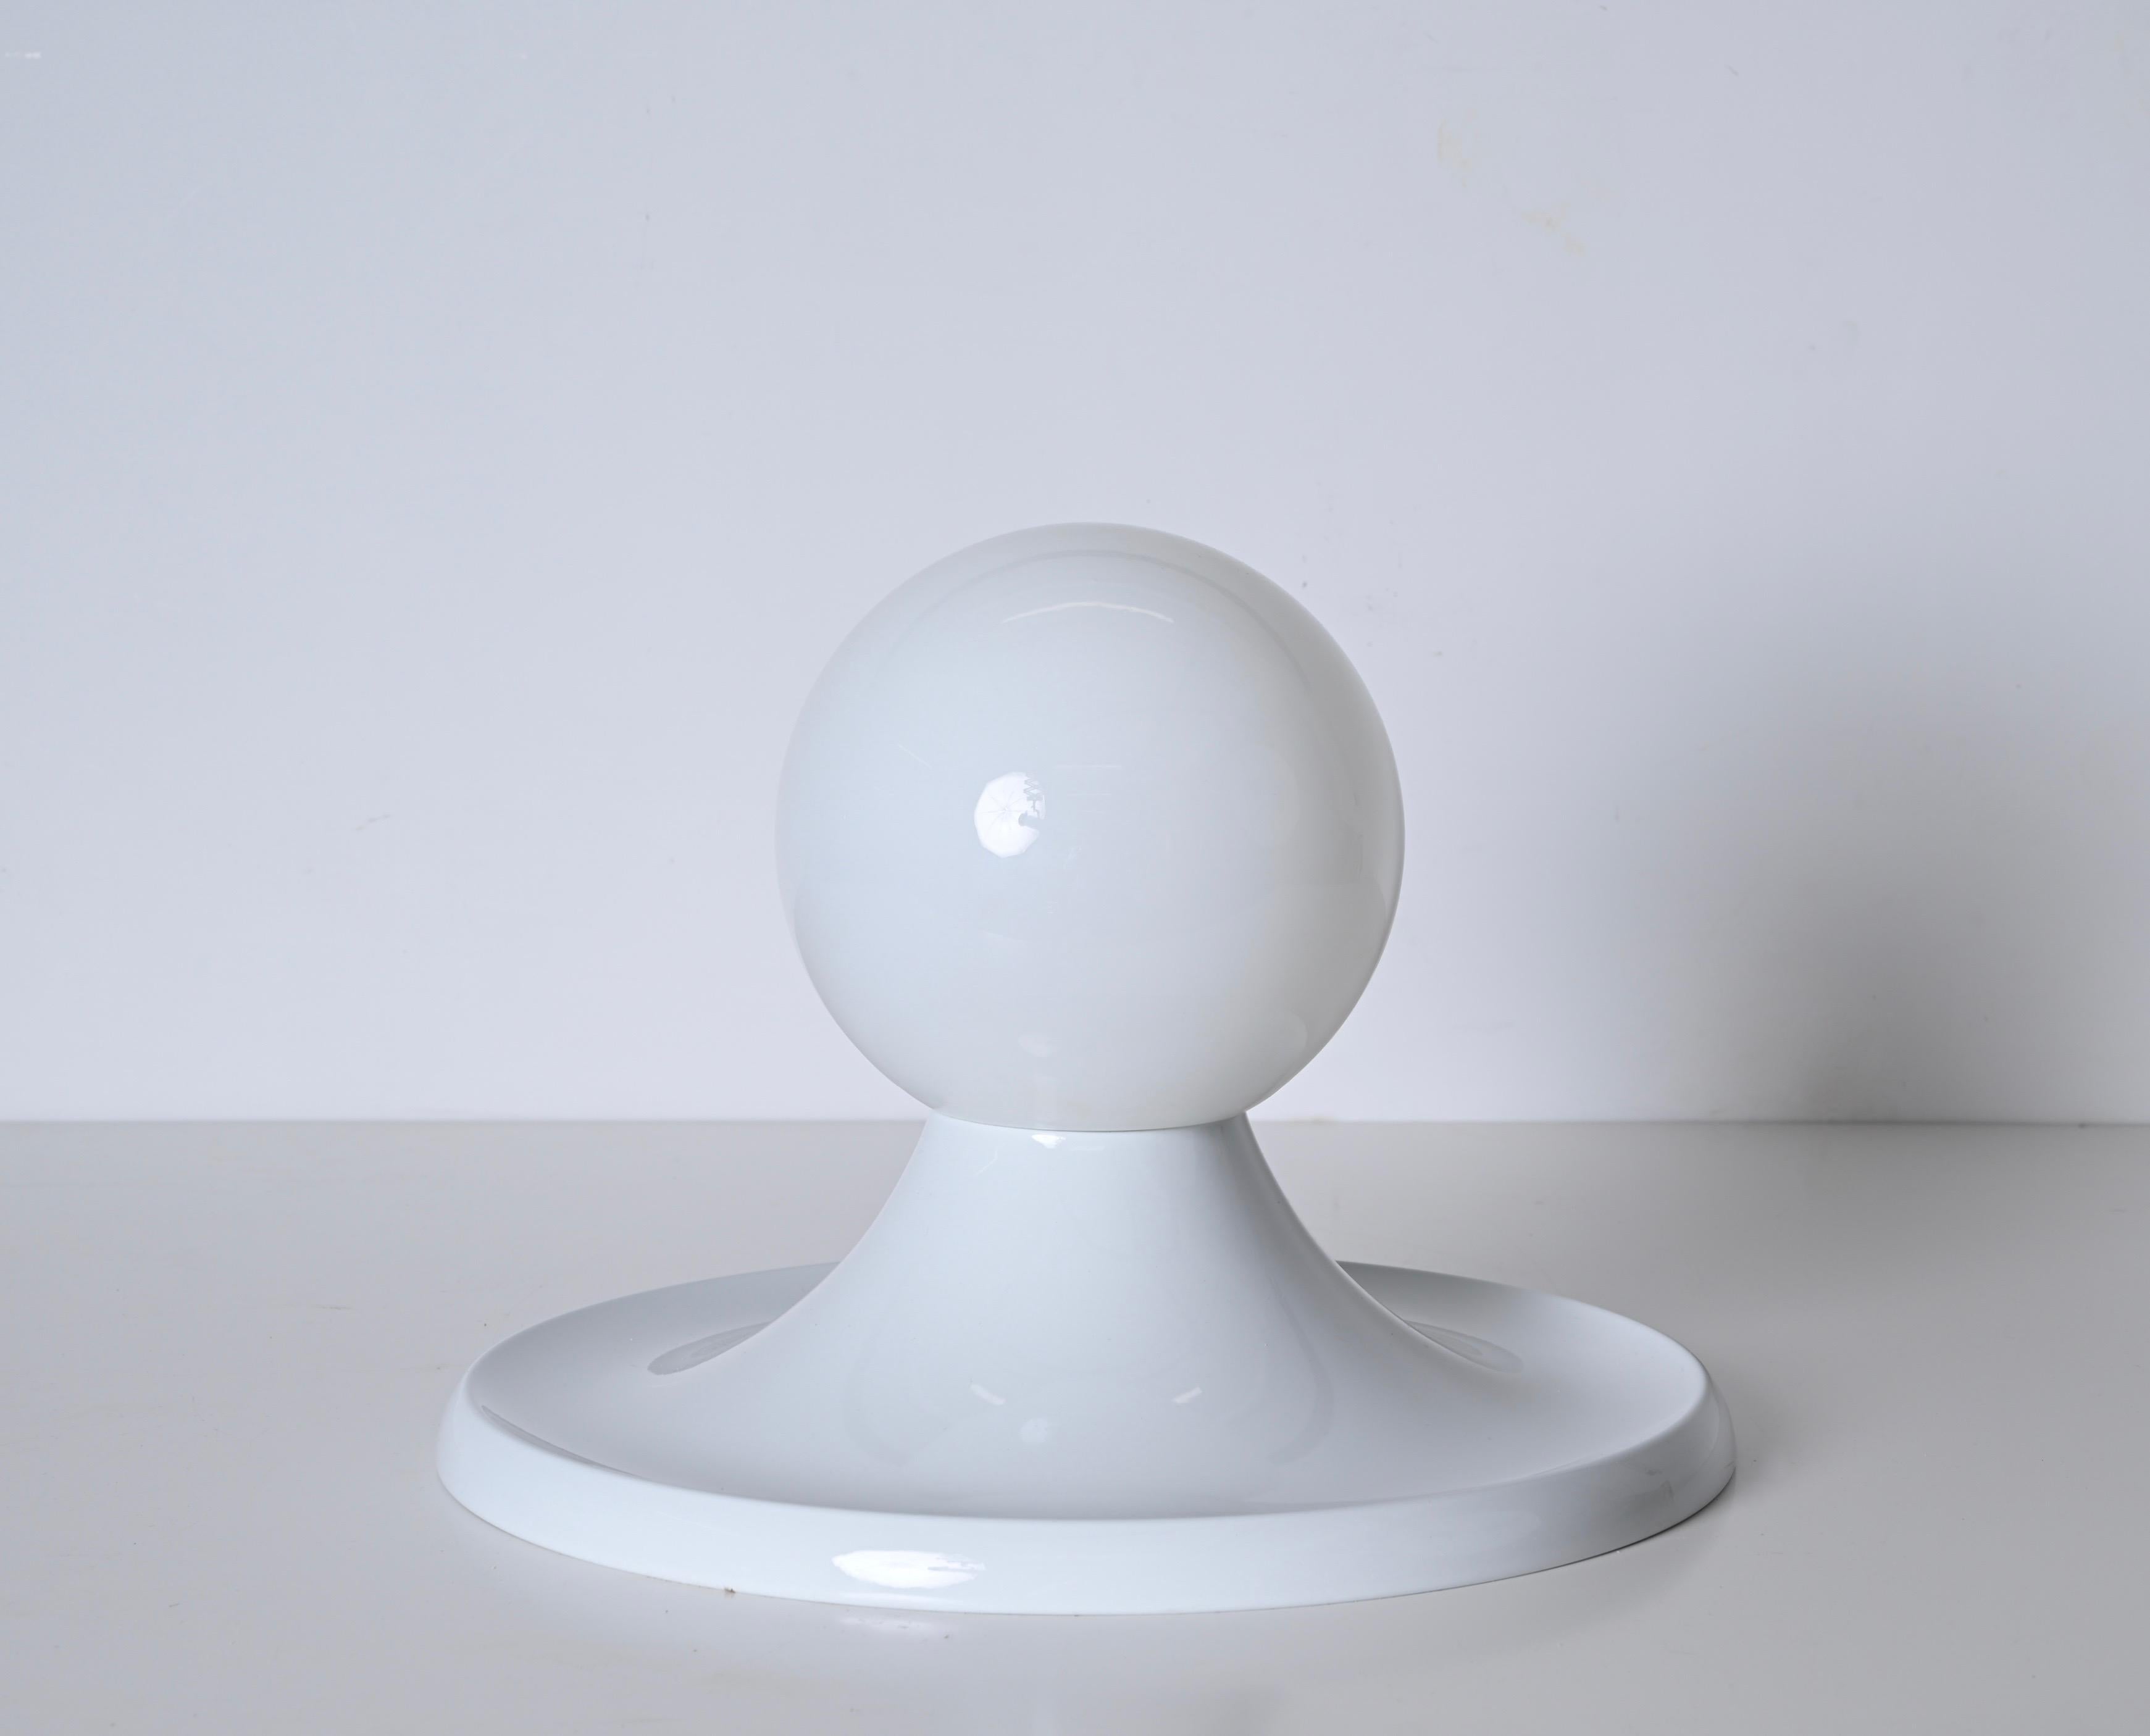 Gorgeous white Light  Ball, designed by Achille Castiglioni for Flos in Italy in the 1960s. in white metal and opal glass. This fantastic lamp was designed by Castiglioni for Arteluce and produced in Italy by Flos in the 1960s.

This iconic lamp can